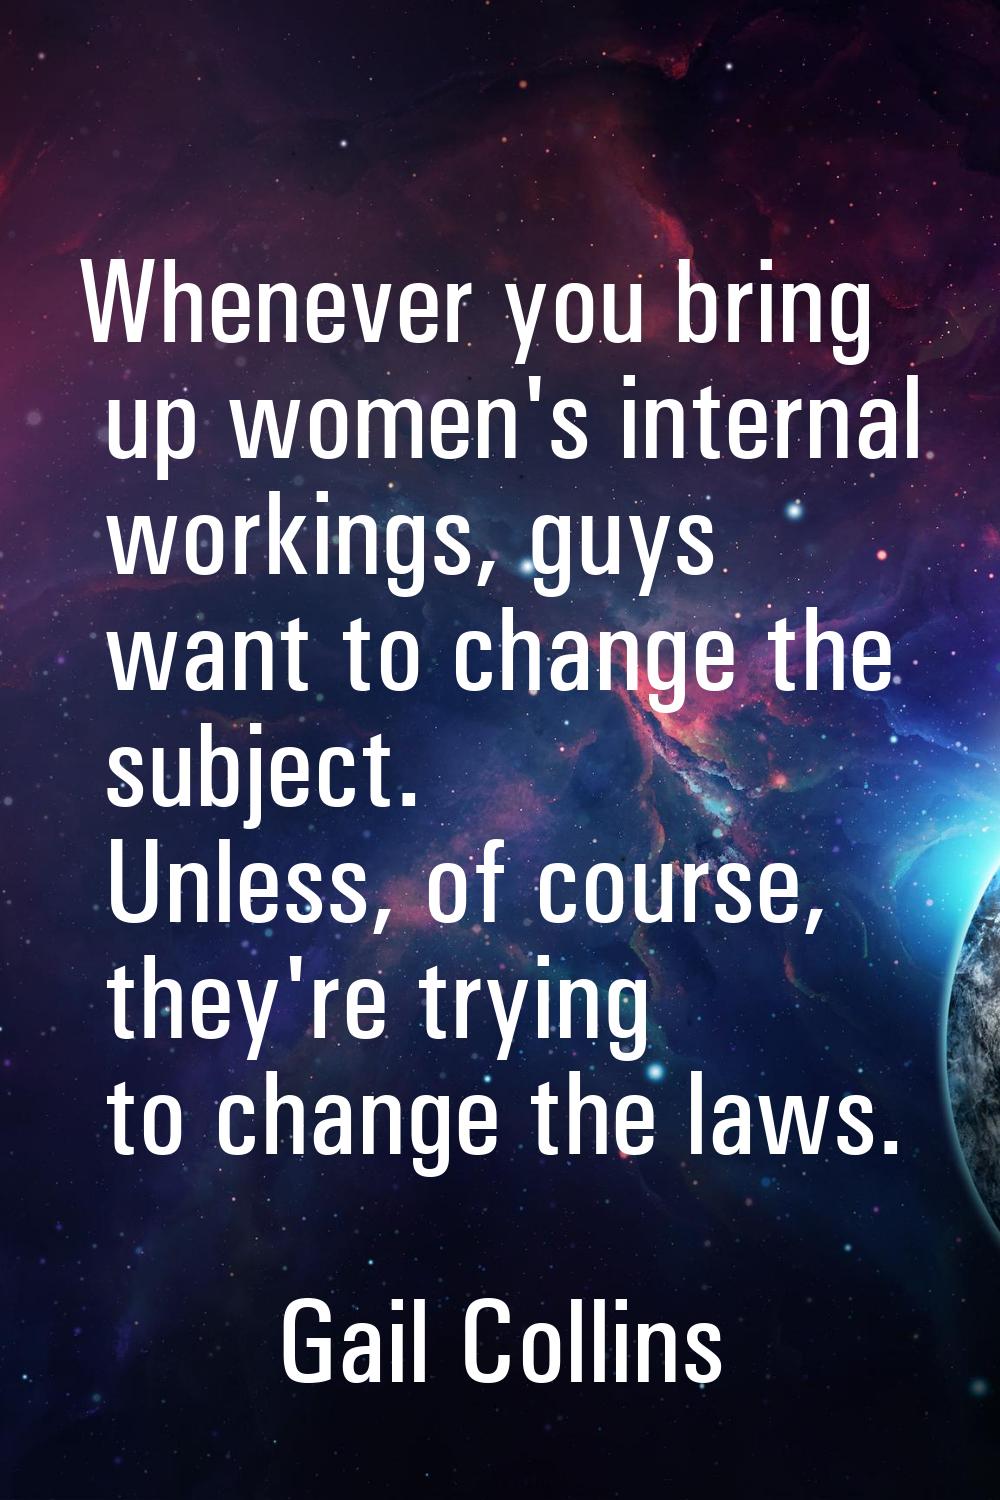 Whenever you bring up women's internal workings, guys want to change the subject. Unless, of course